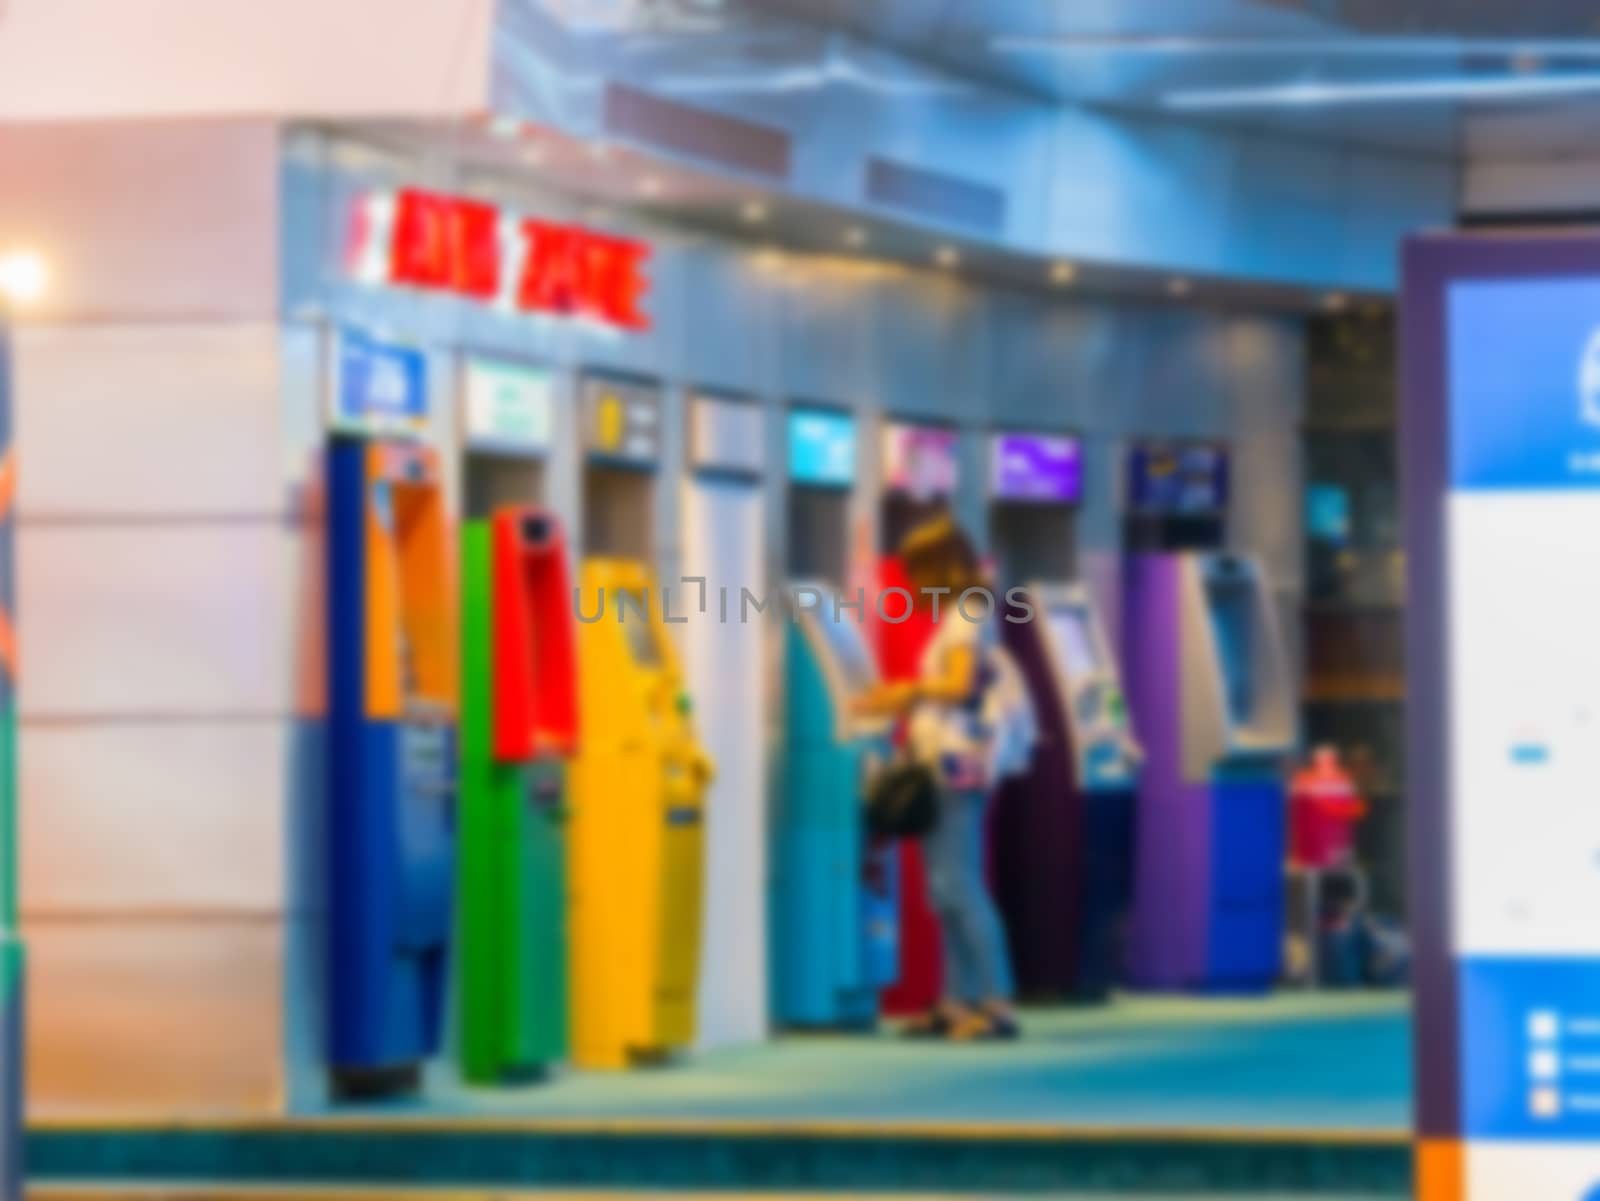 Blurred,Women are pressing the money at the ATM.